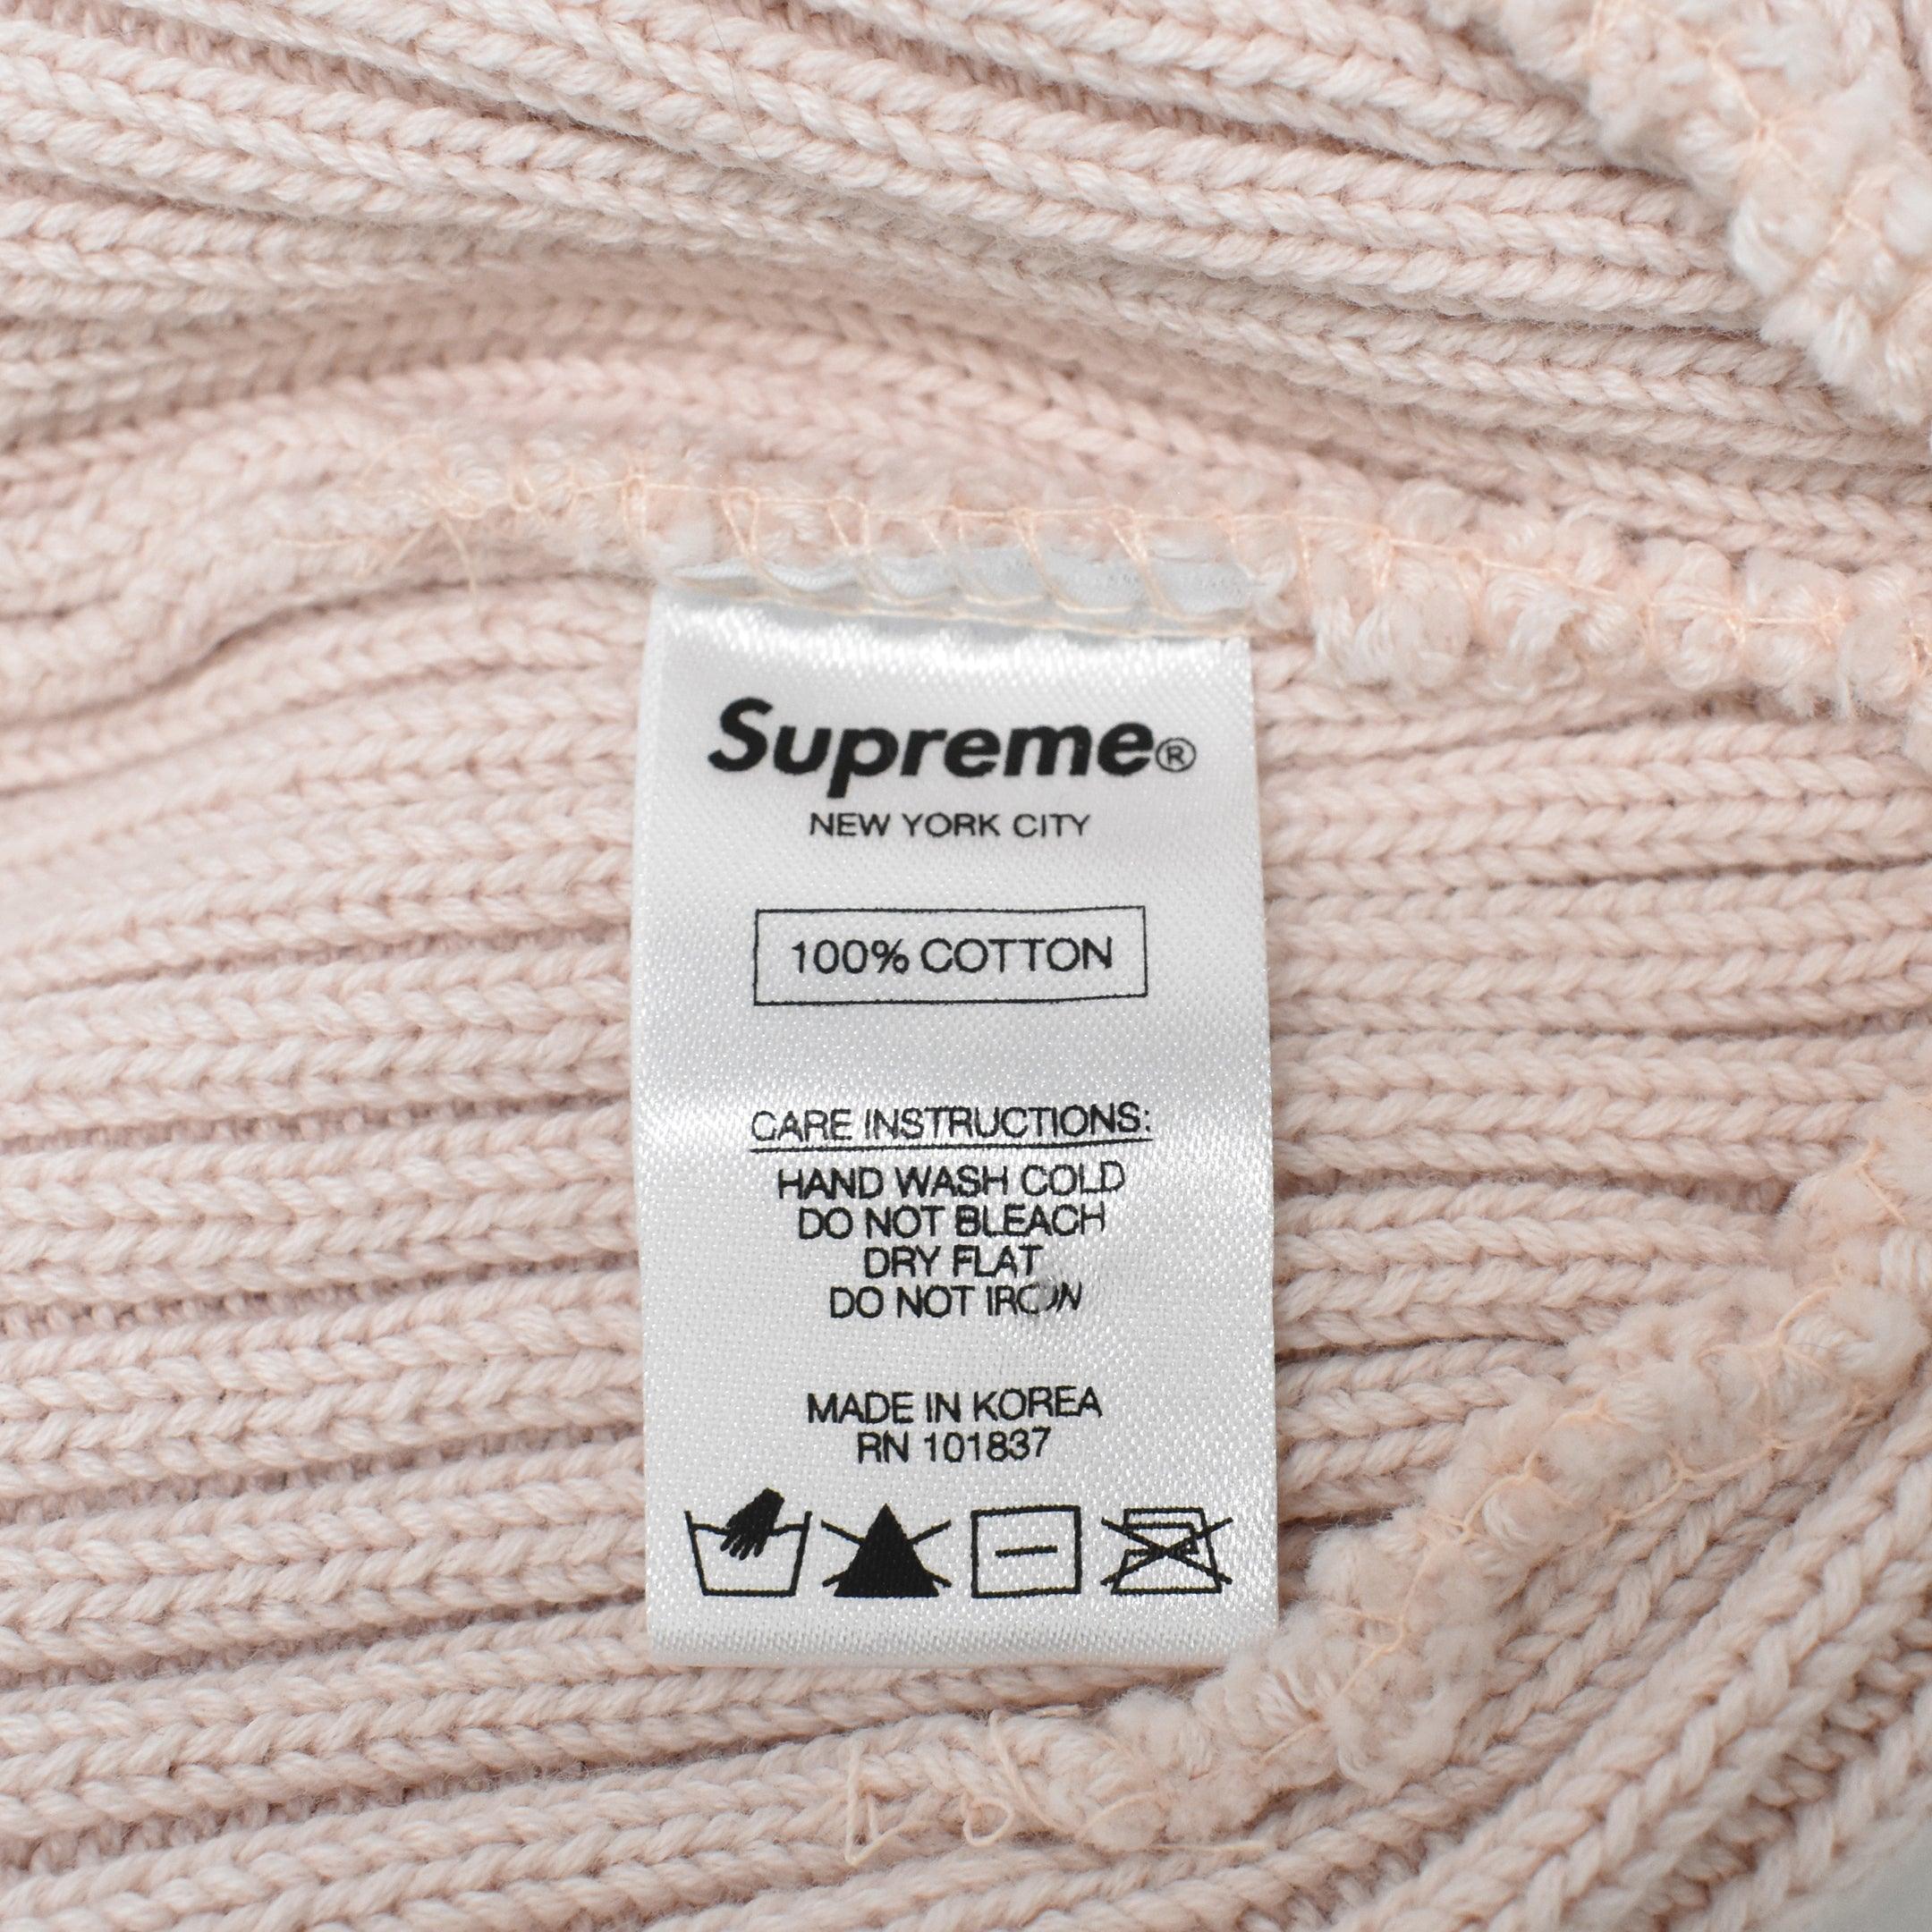 Supreme Toque - Fashionably Yours